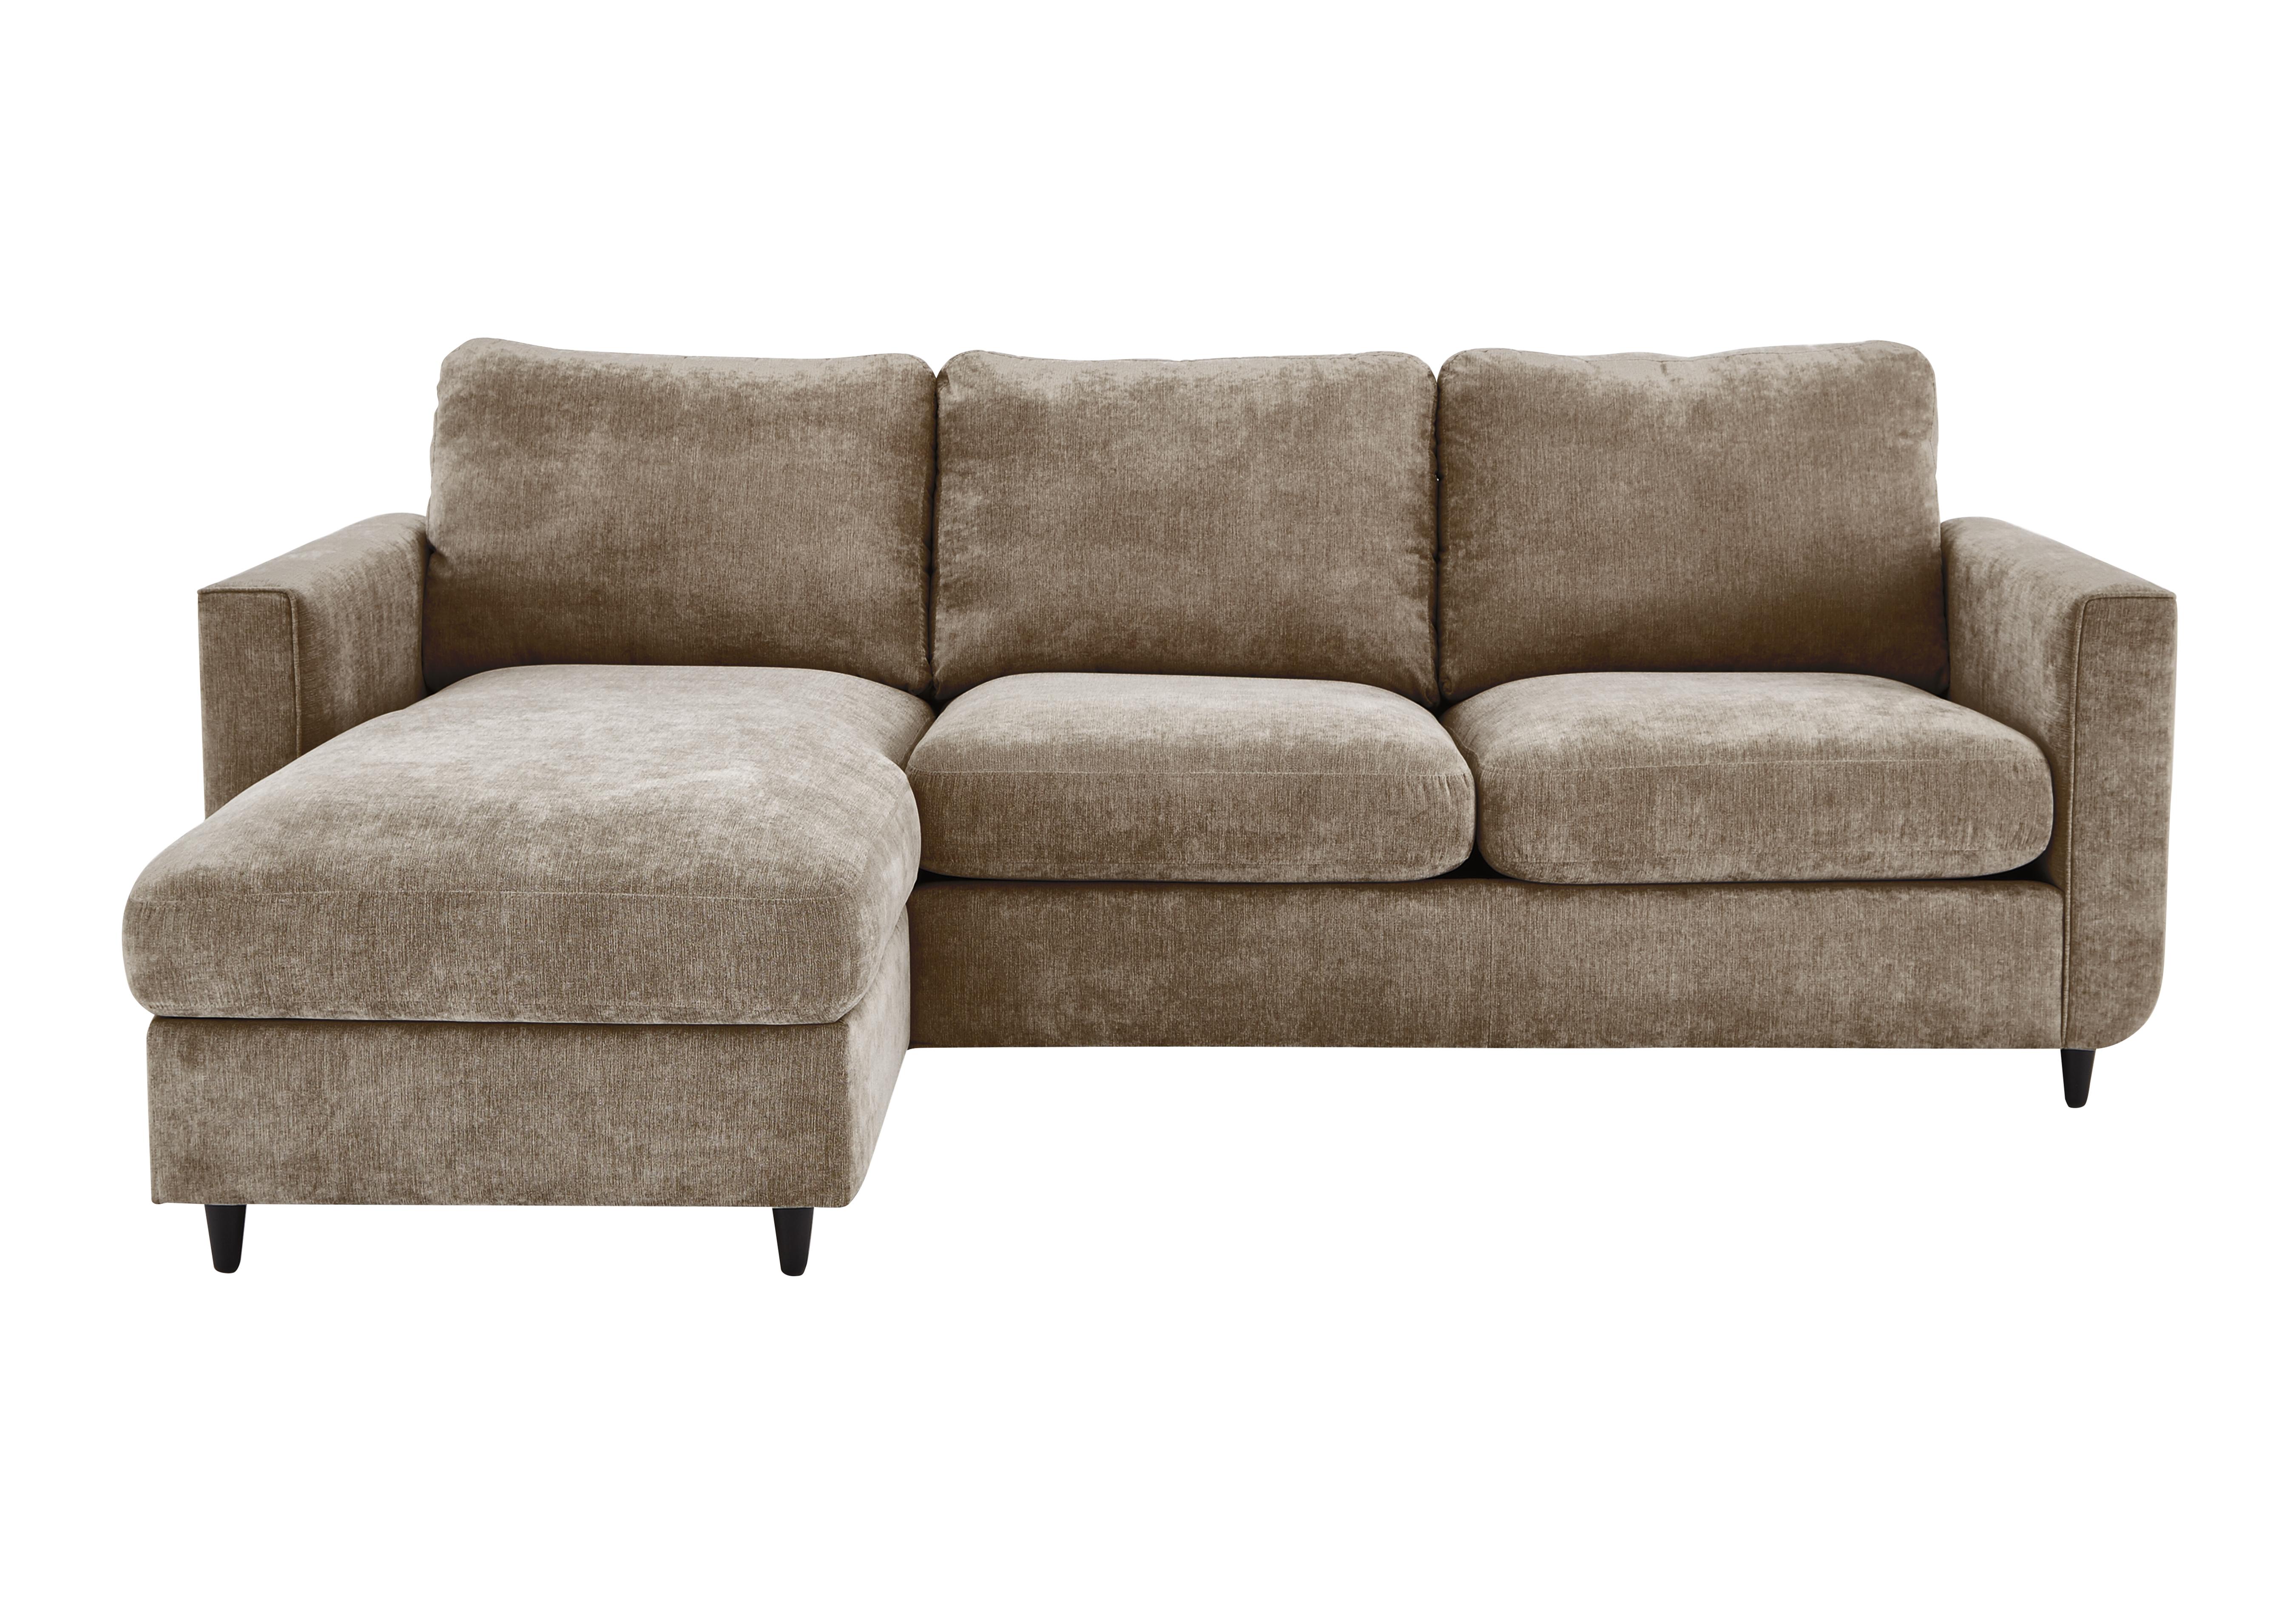 Esprit Fabric Chaise Sofa Bed with Storage in Taupe Ebony Feet on Furniture Village